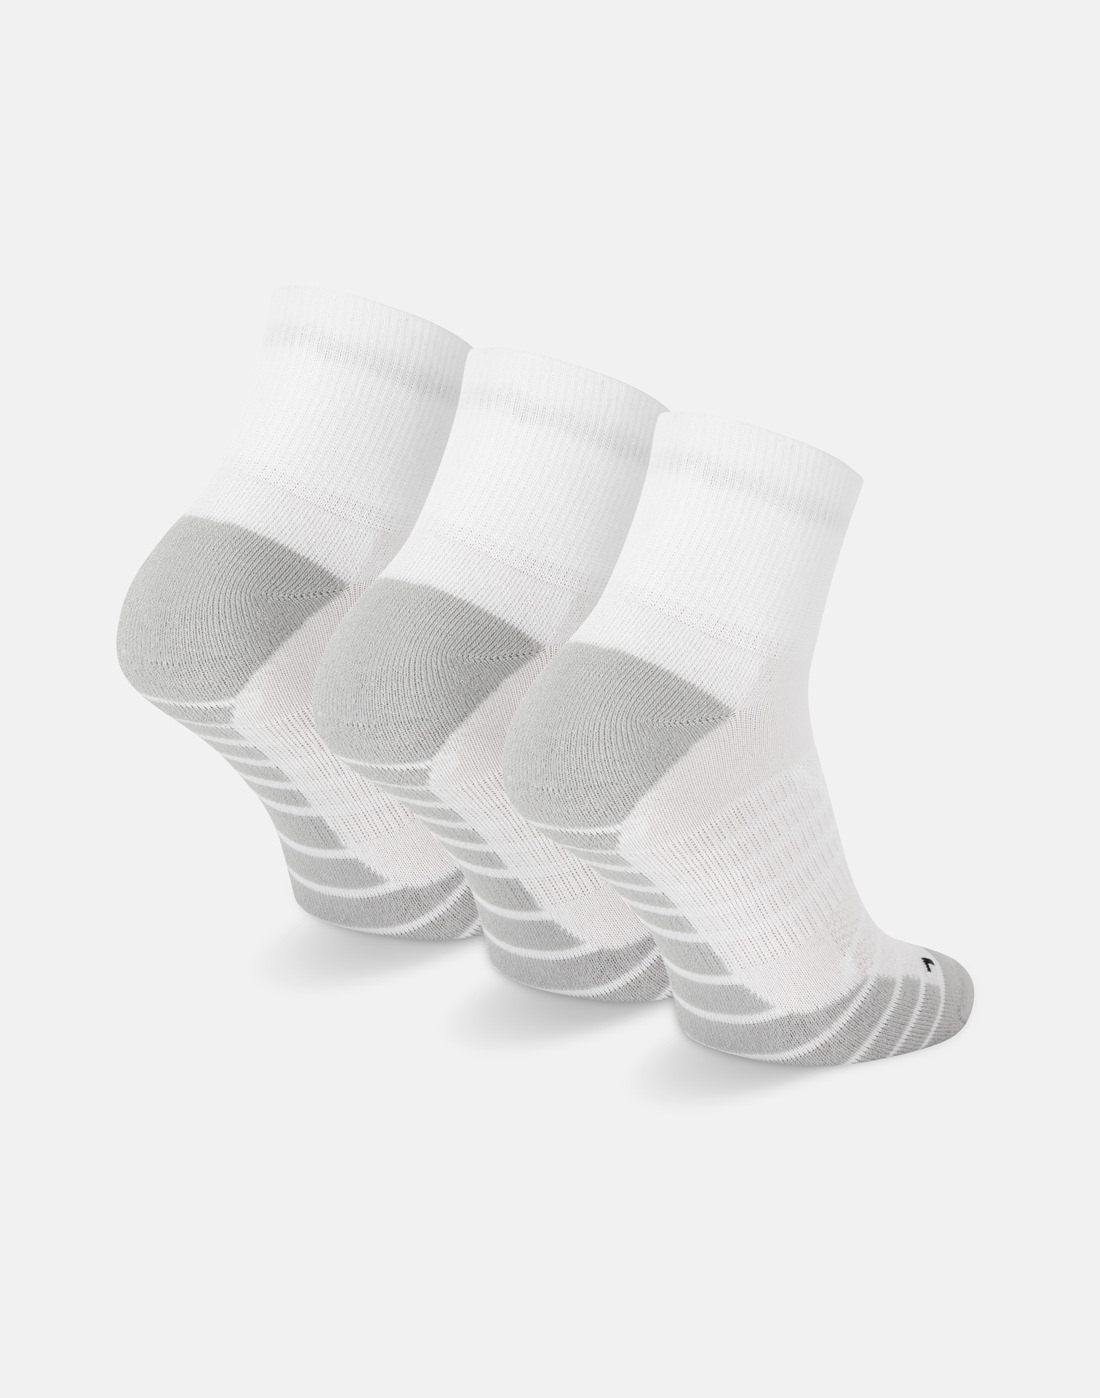 Nike Everyday Cushion 3 Pack Ankle Socks - White | Life Style Sports IE